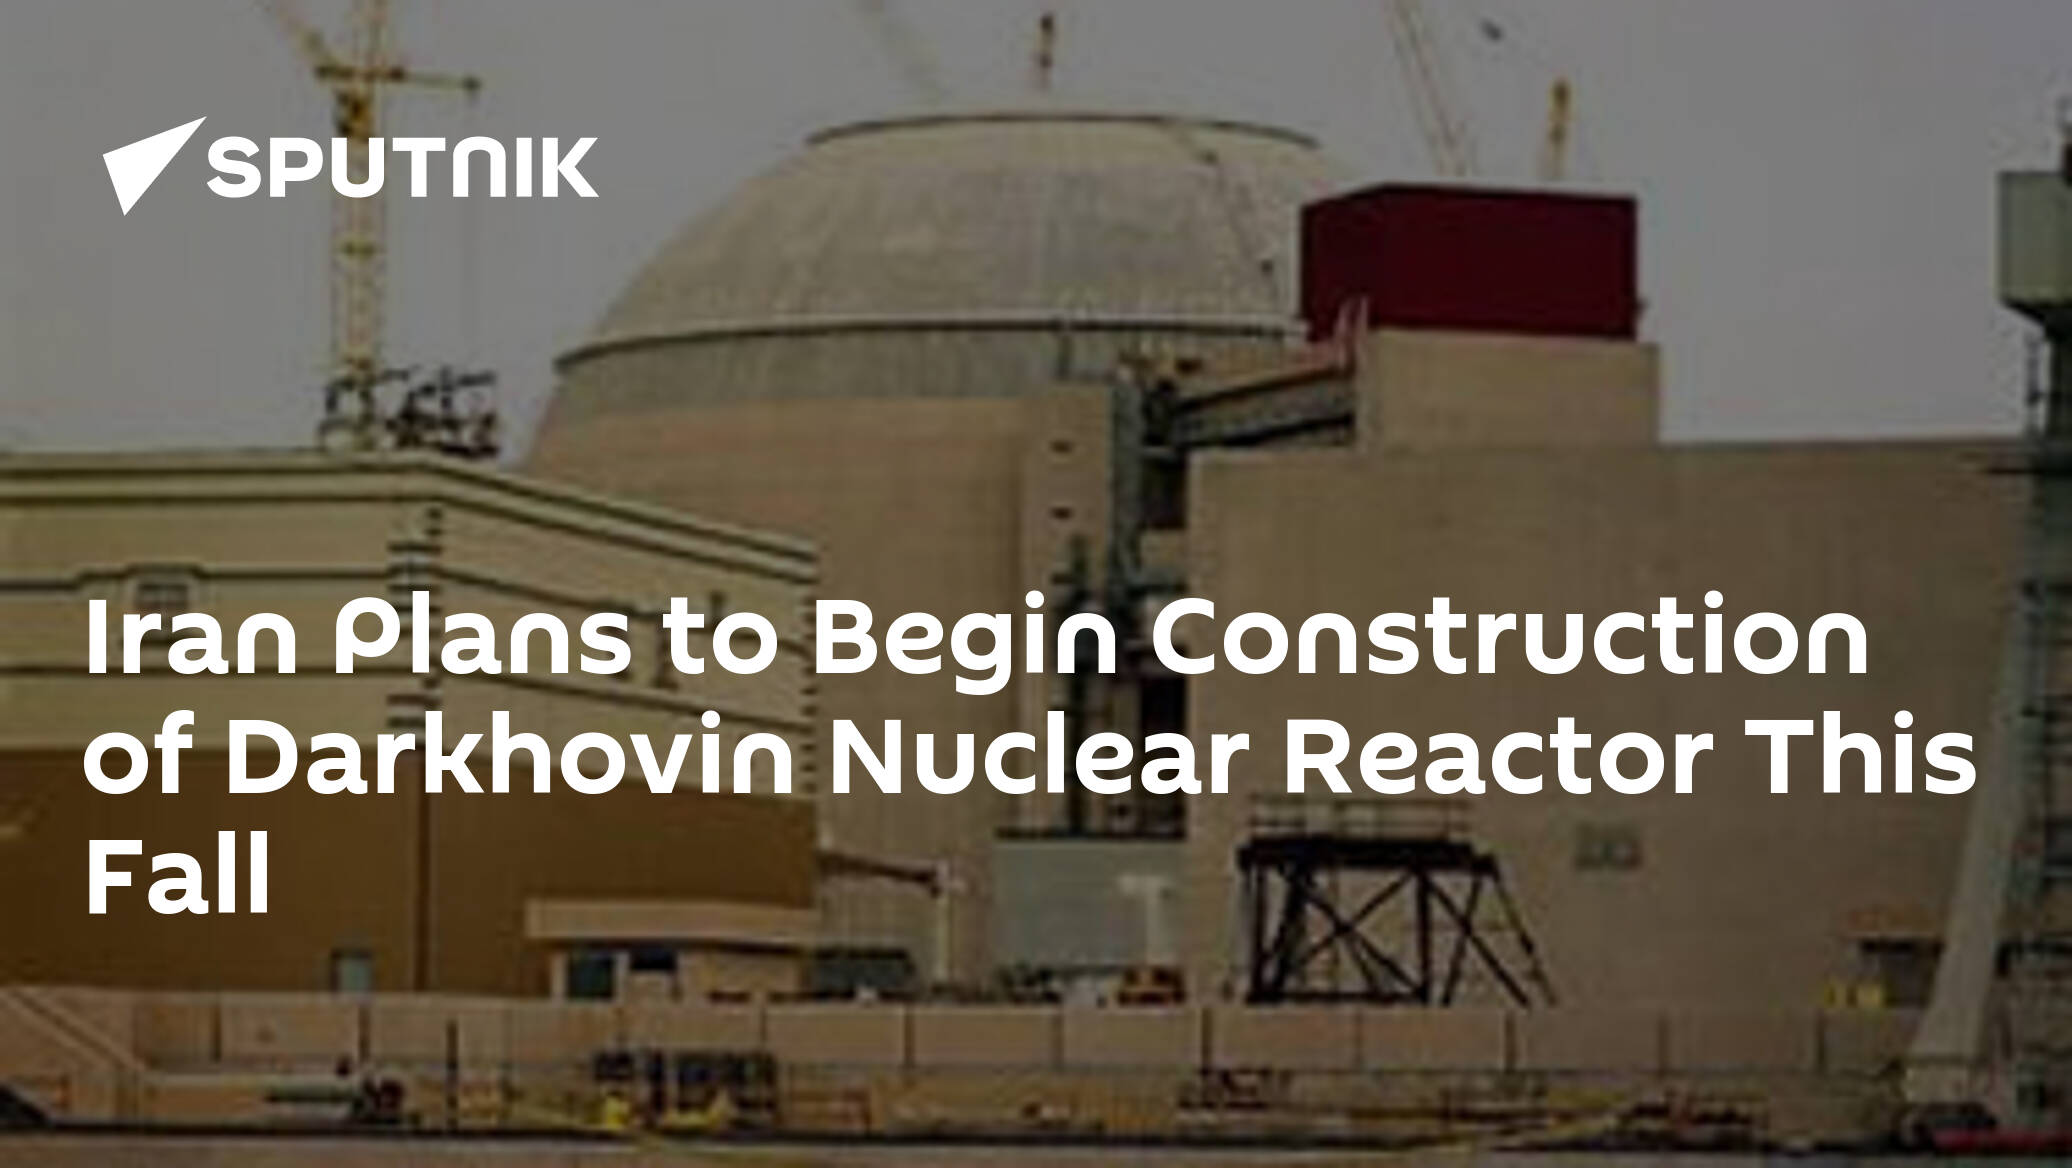 Iran Plans to Begin Construction of Darkhovin Nuclear Reactor This Fall